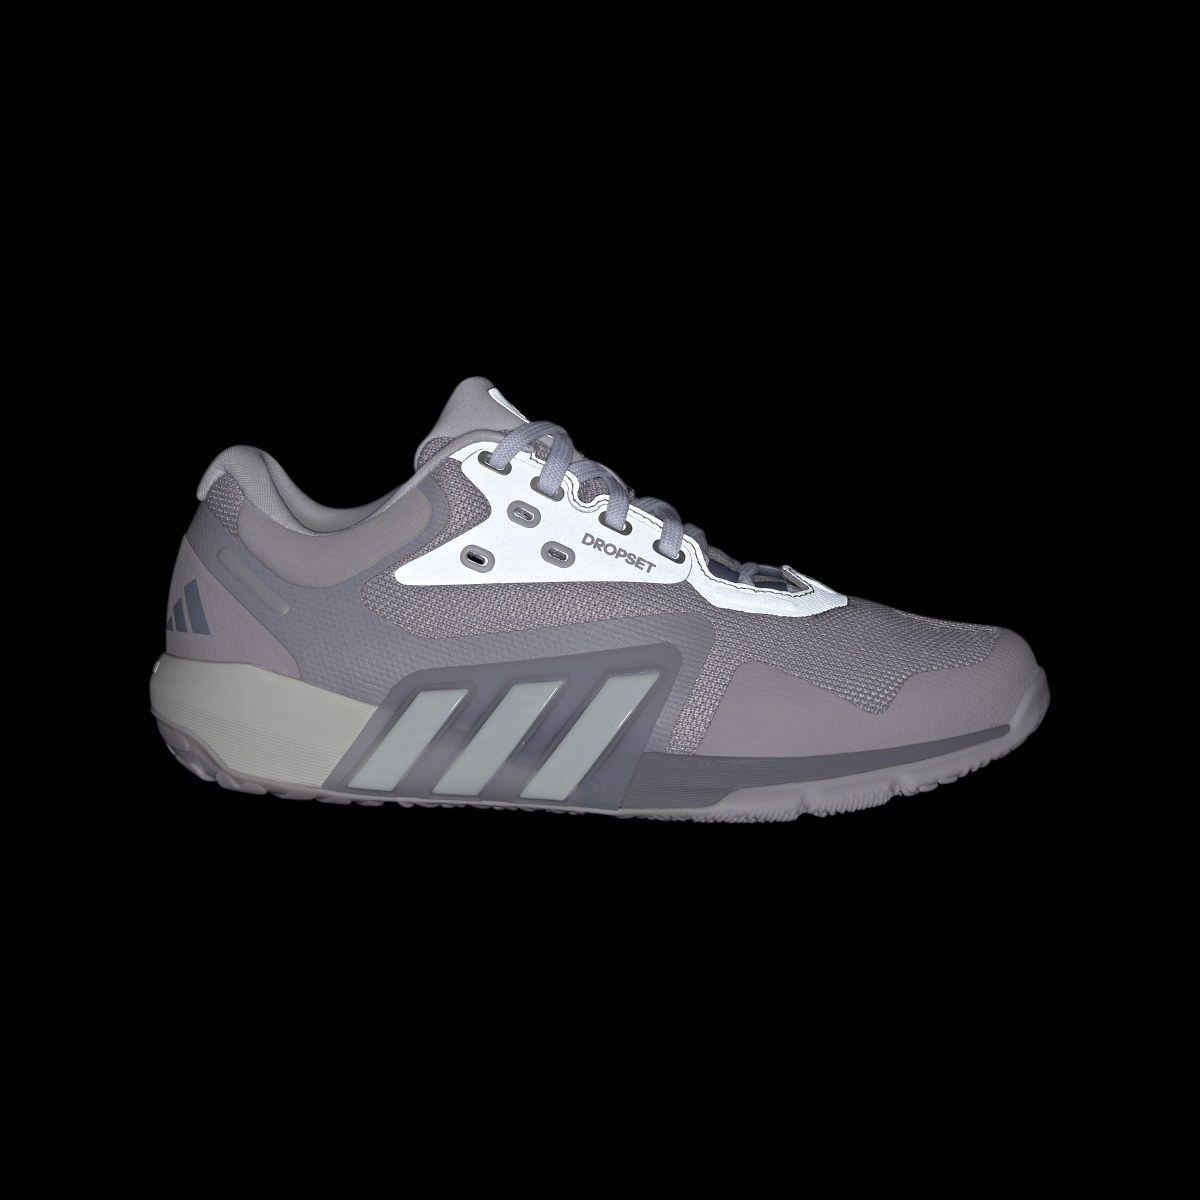 Adidas Dropset Trainer Shoes. 5